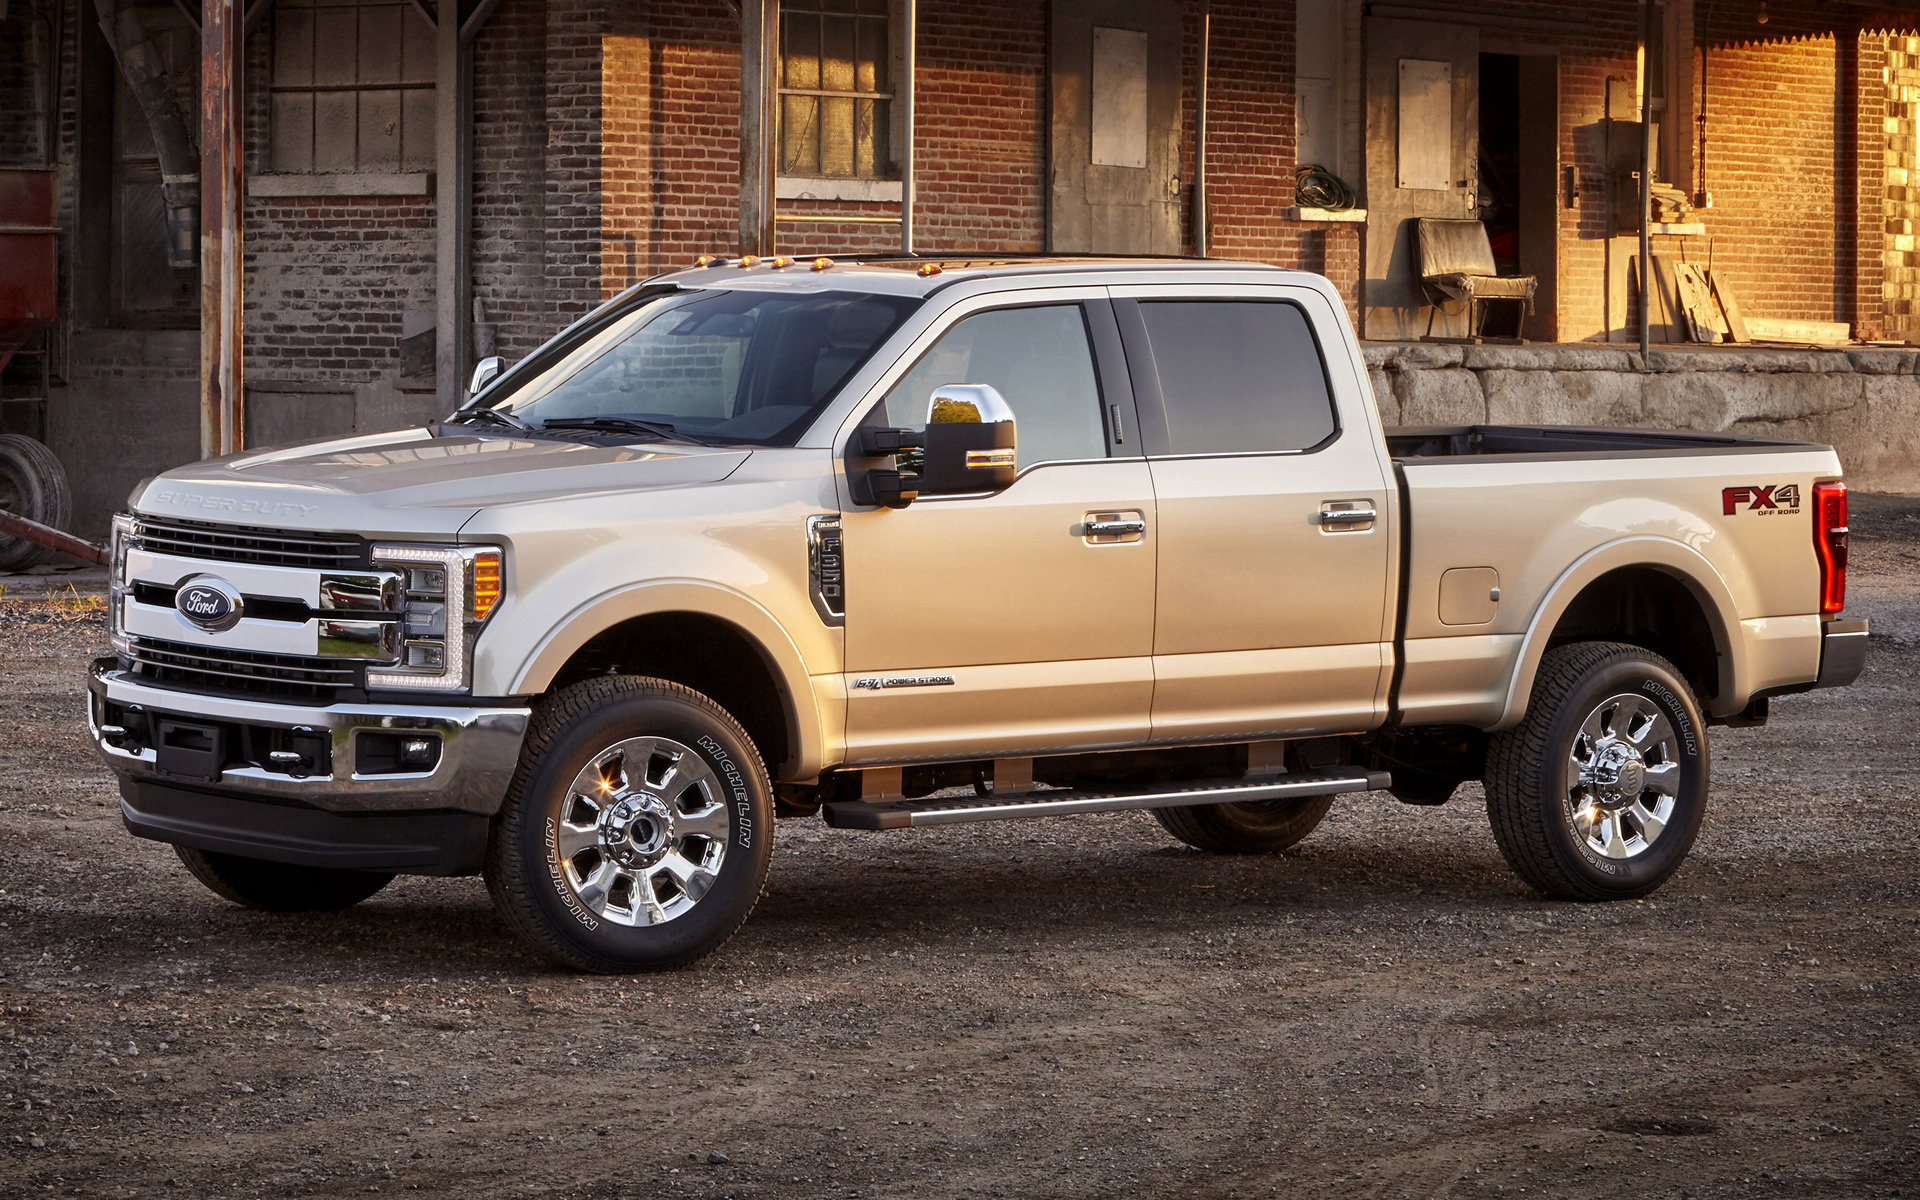 Super Duty King Ranch Fx4 Crew Cab Wallpaper And HD Image